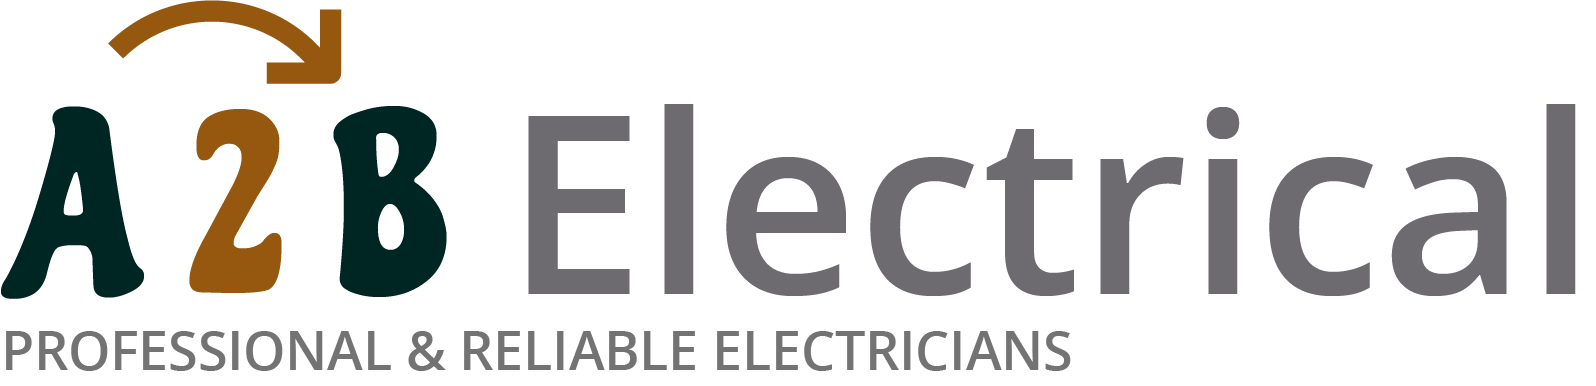 If you have electrical wiring problems in Chessington, we can provide an electrician to have a look for you. 